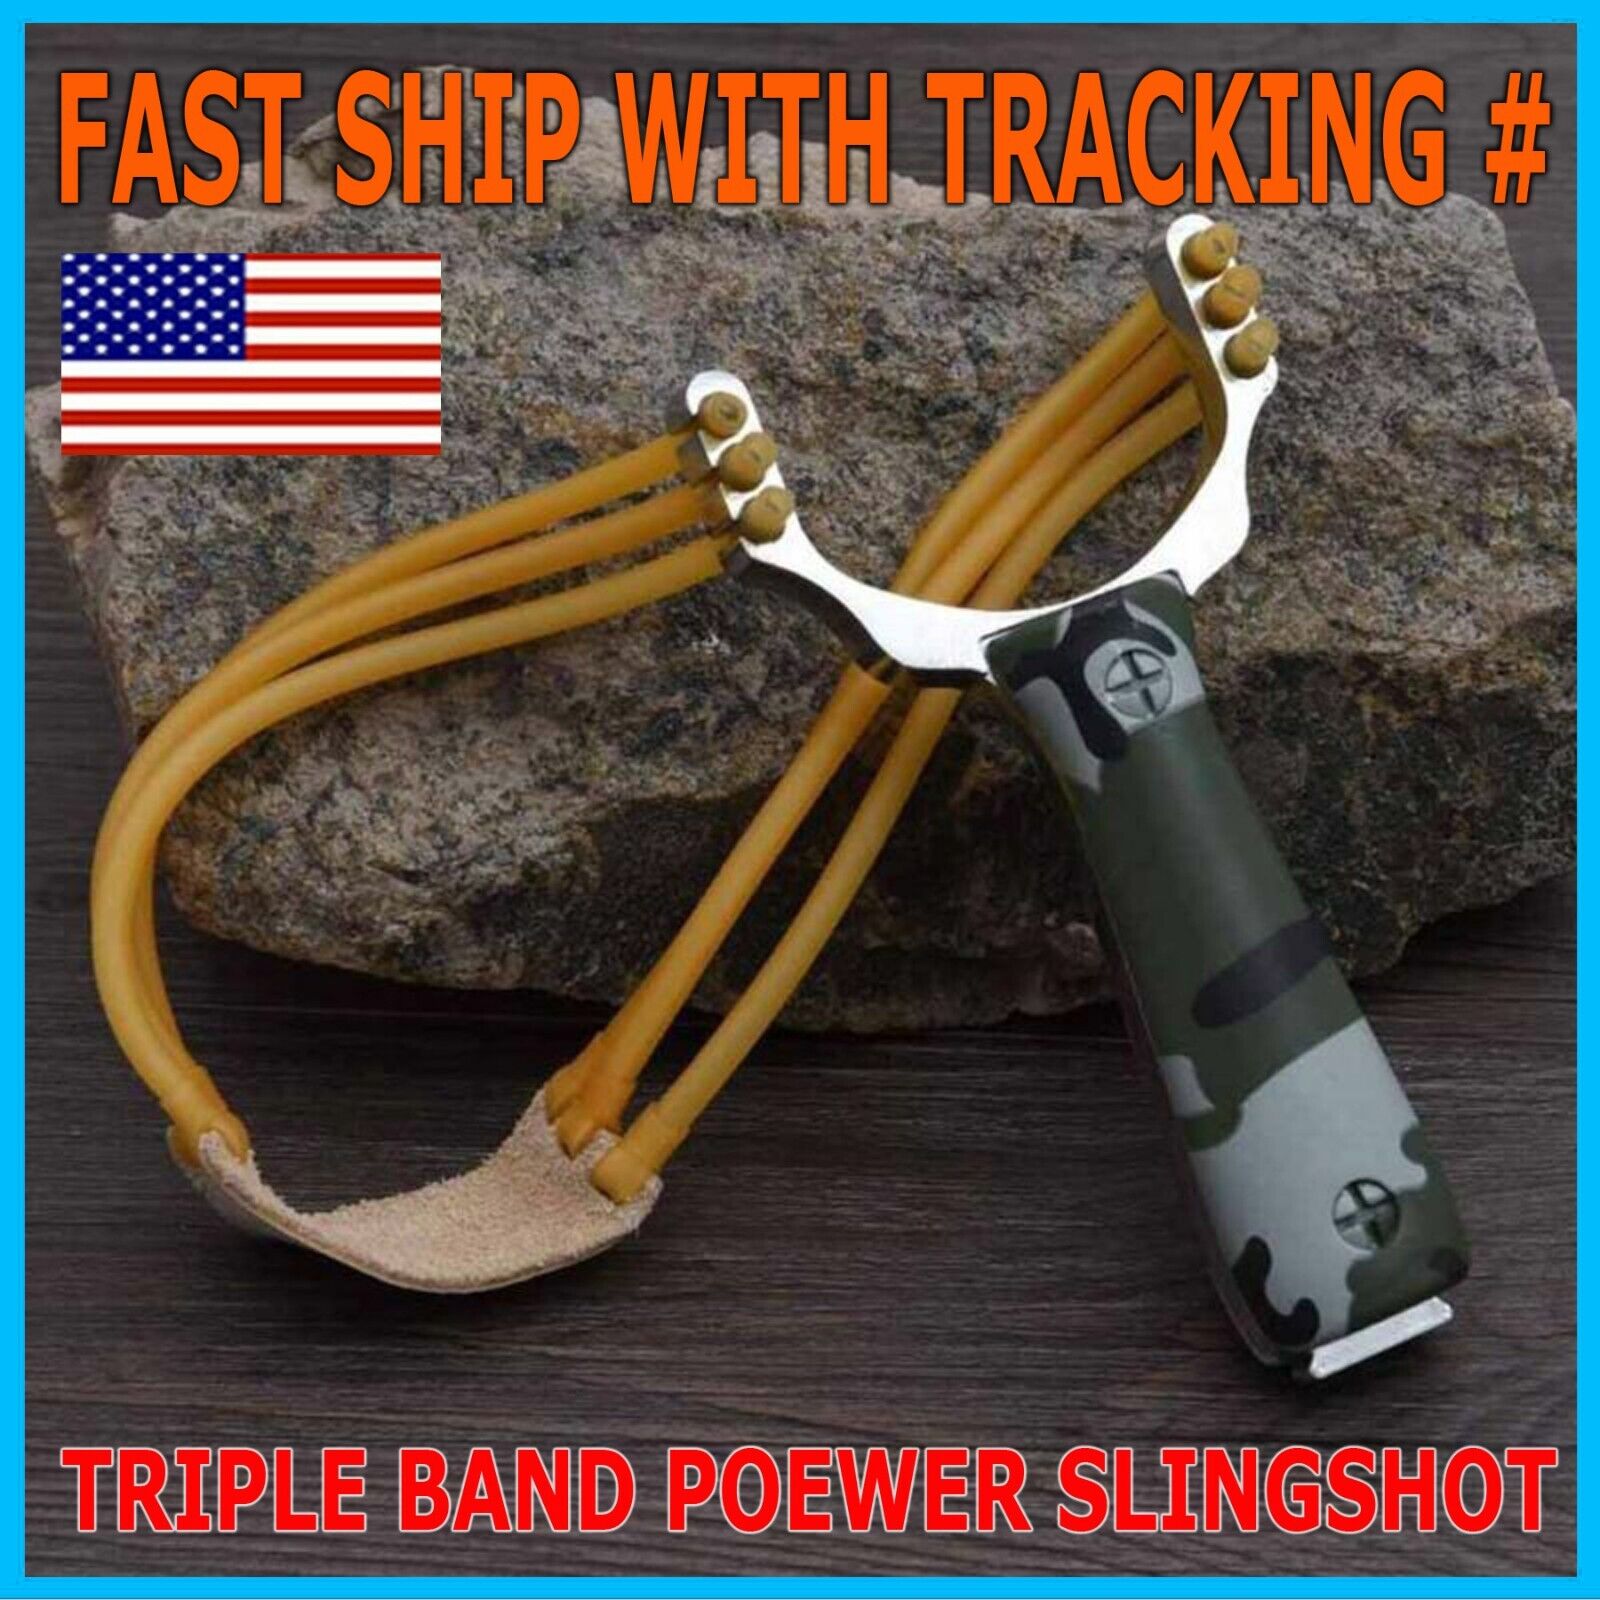 Slingshot CAMOUFLAGE High Velocity Powerful Catapult Hunt Sling Shot Outdoor NEW